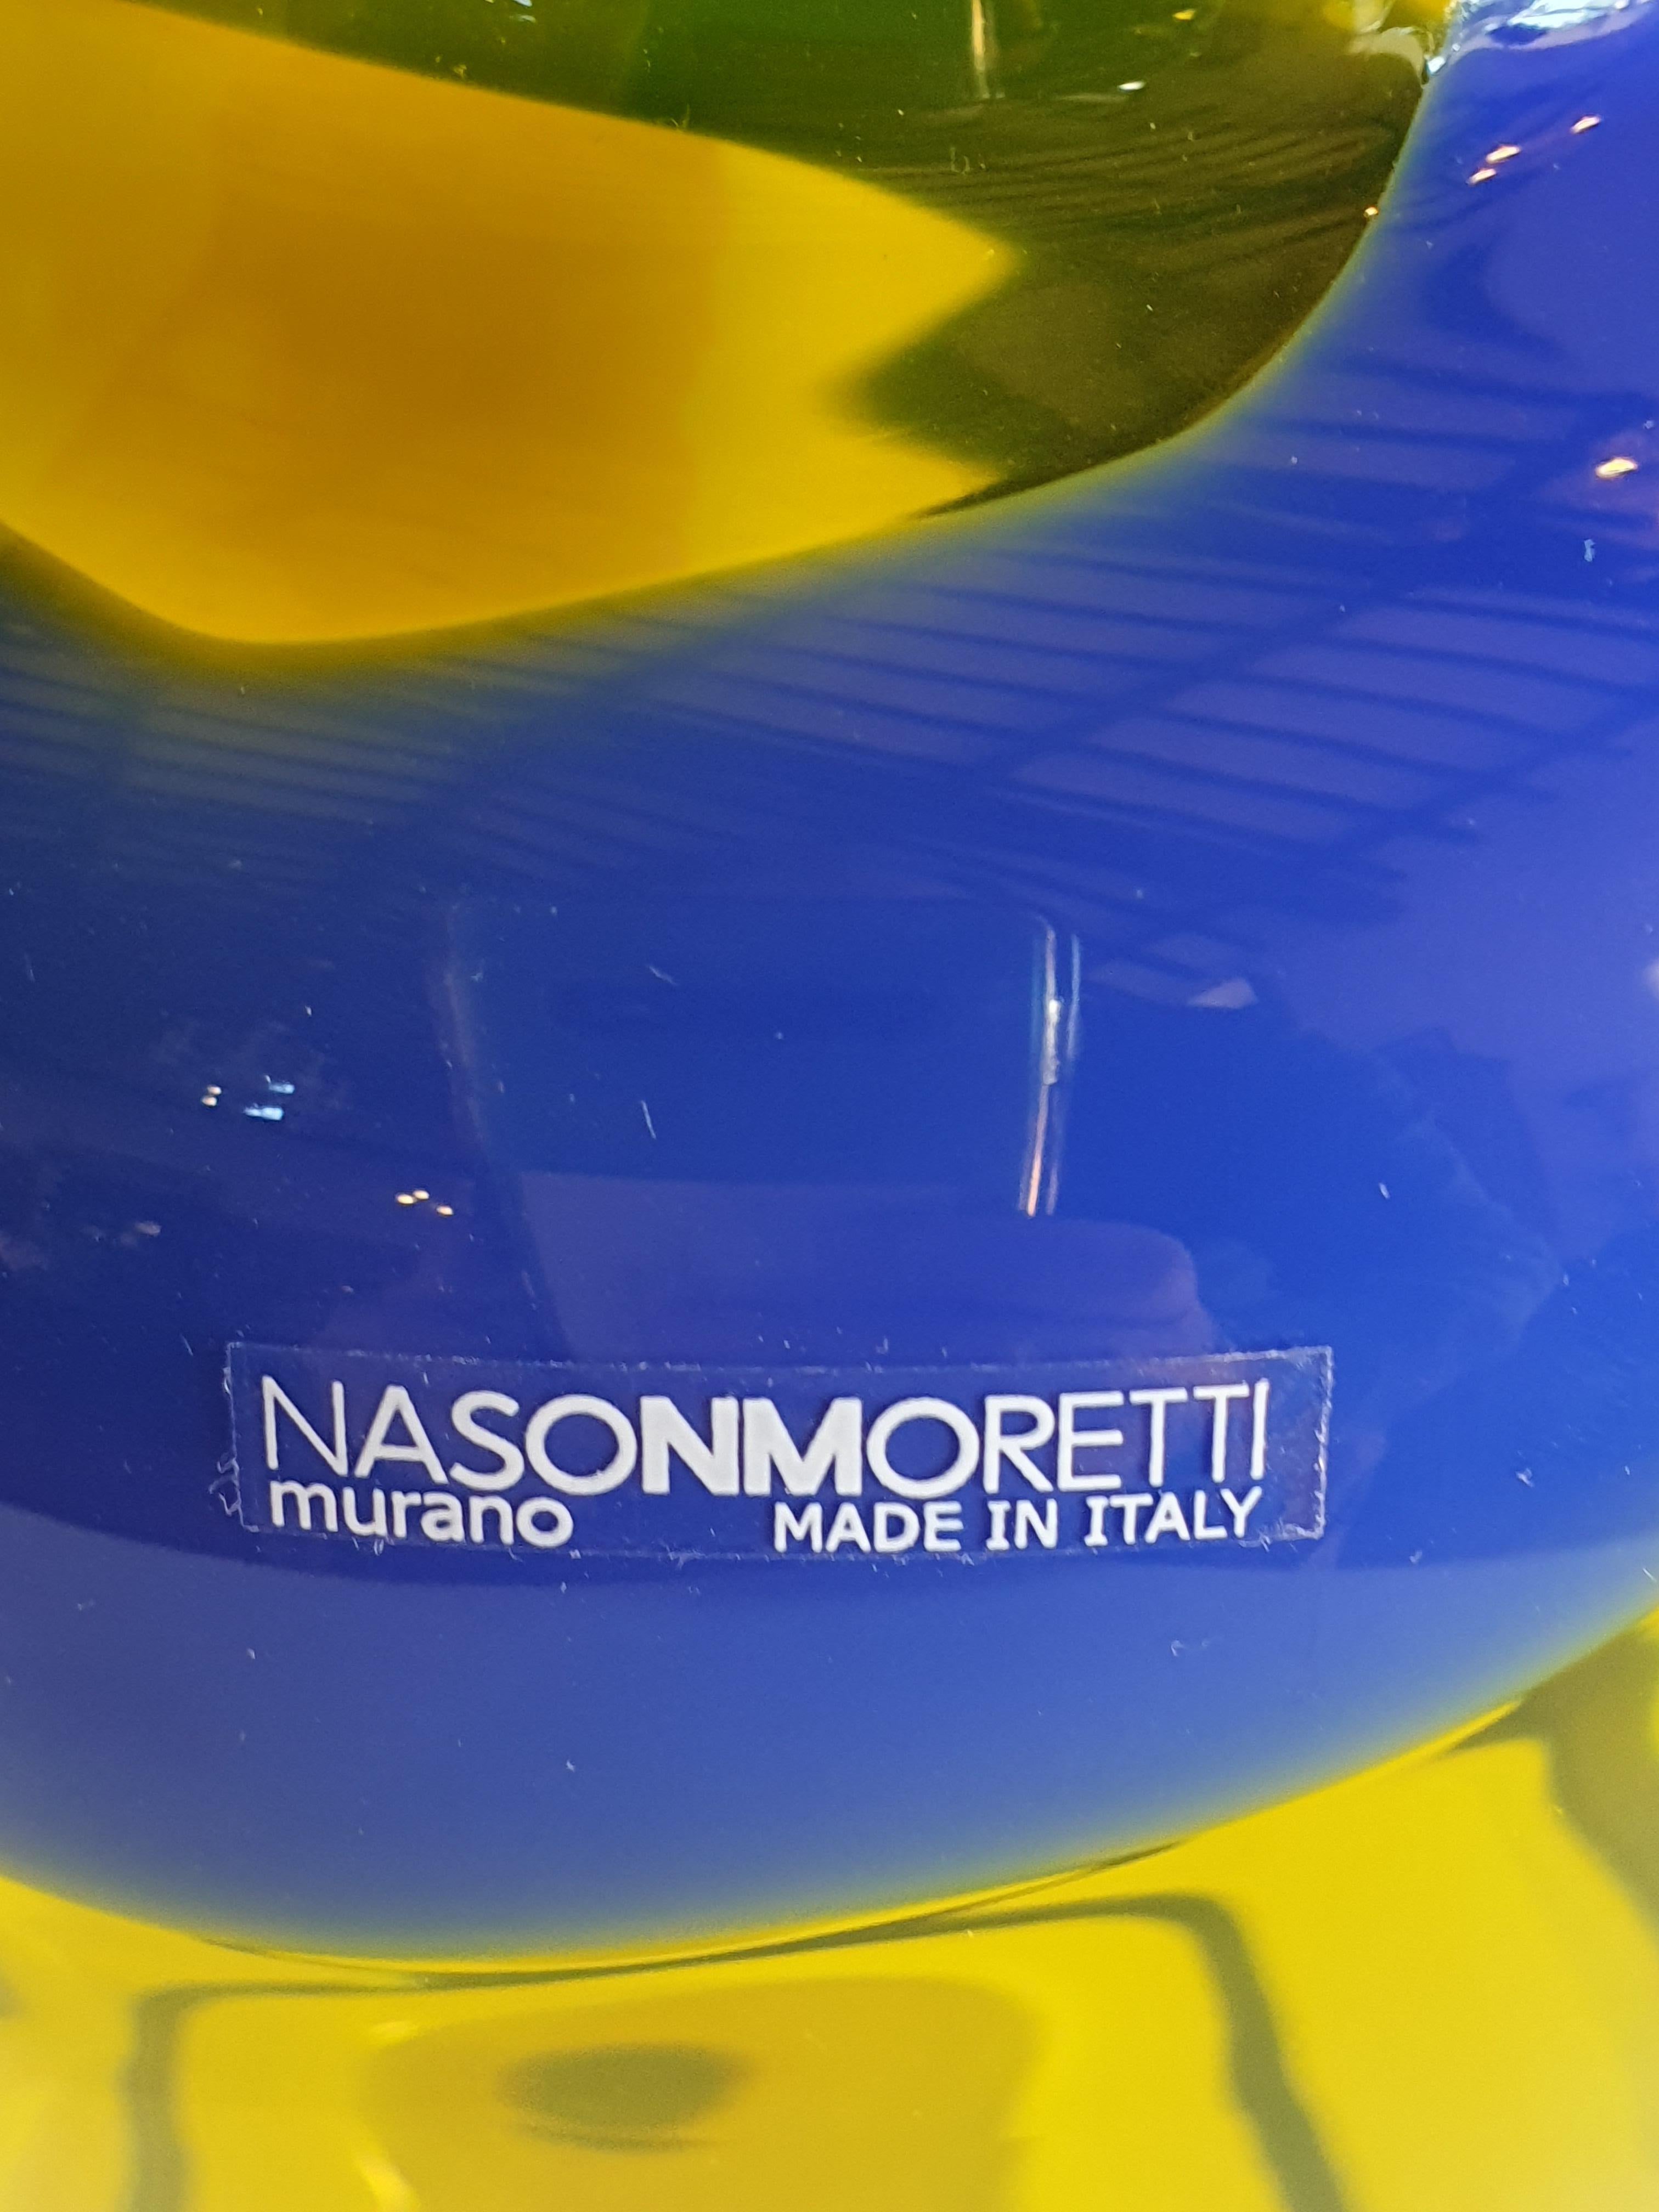 In blue and yellow colors.
NasonMoretti, born in 1923, creates its products in a limited number, adressind those who are not easily pleased, those who love and search for value and elegance in everyday gestures and objects.
Each piece contains the